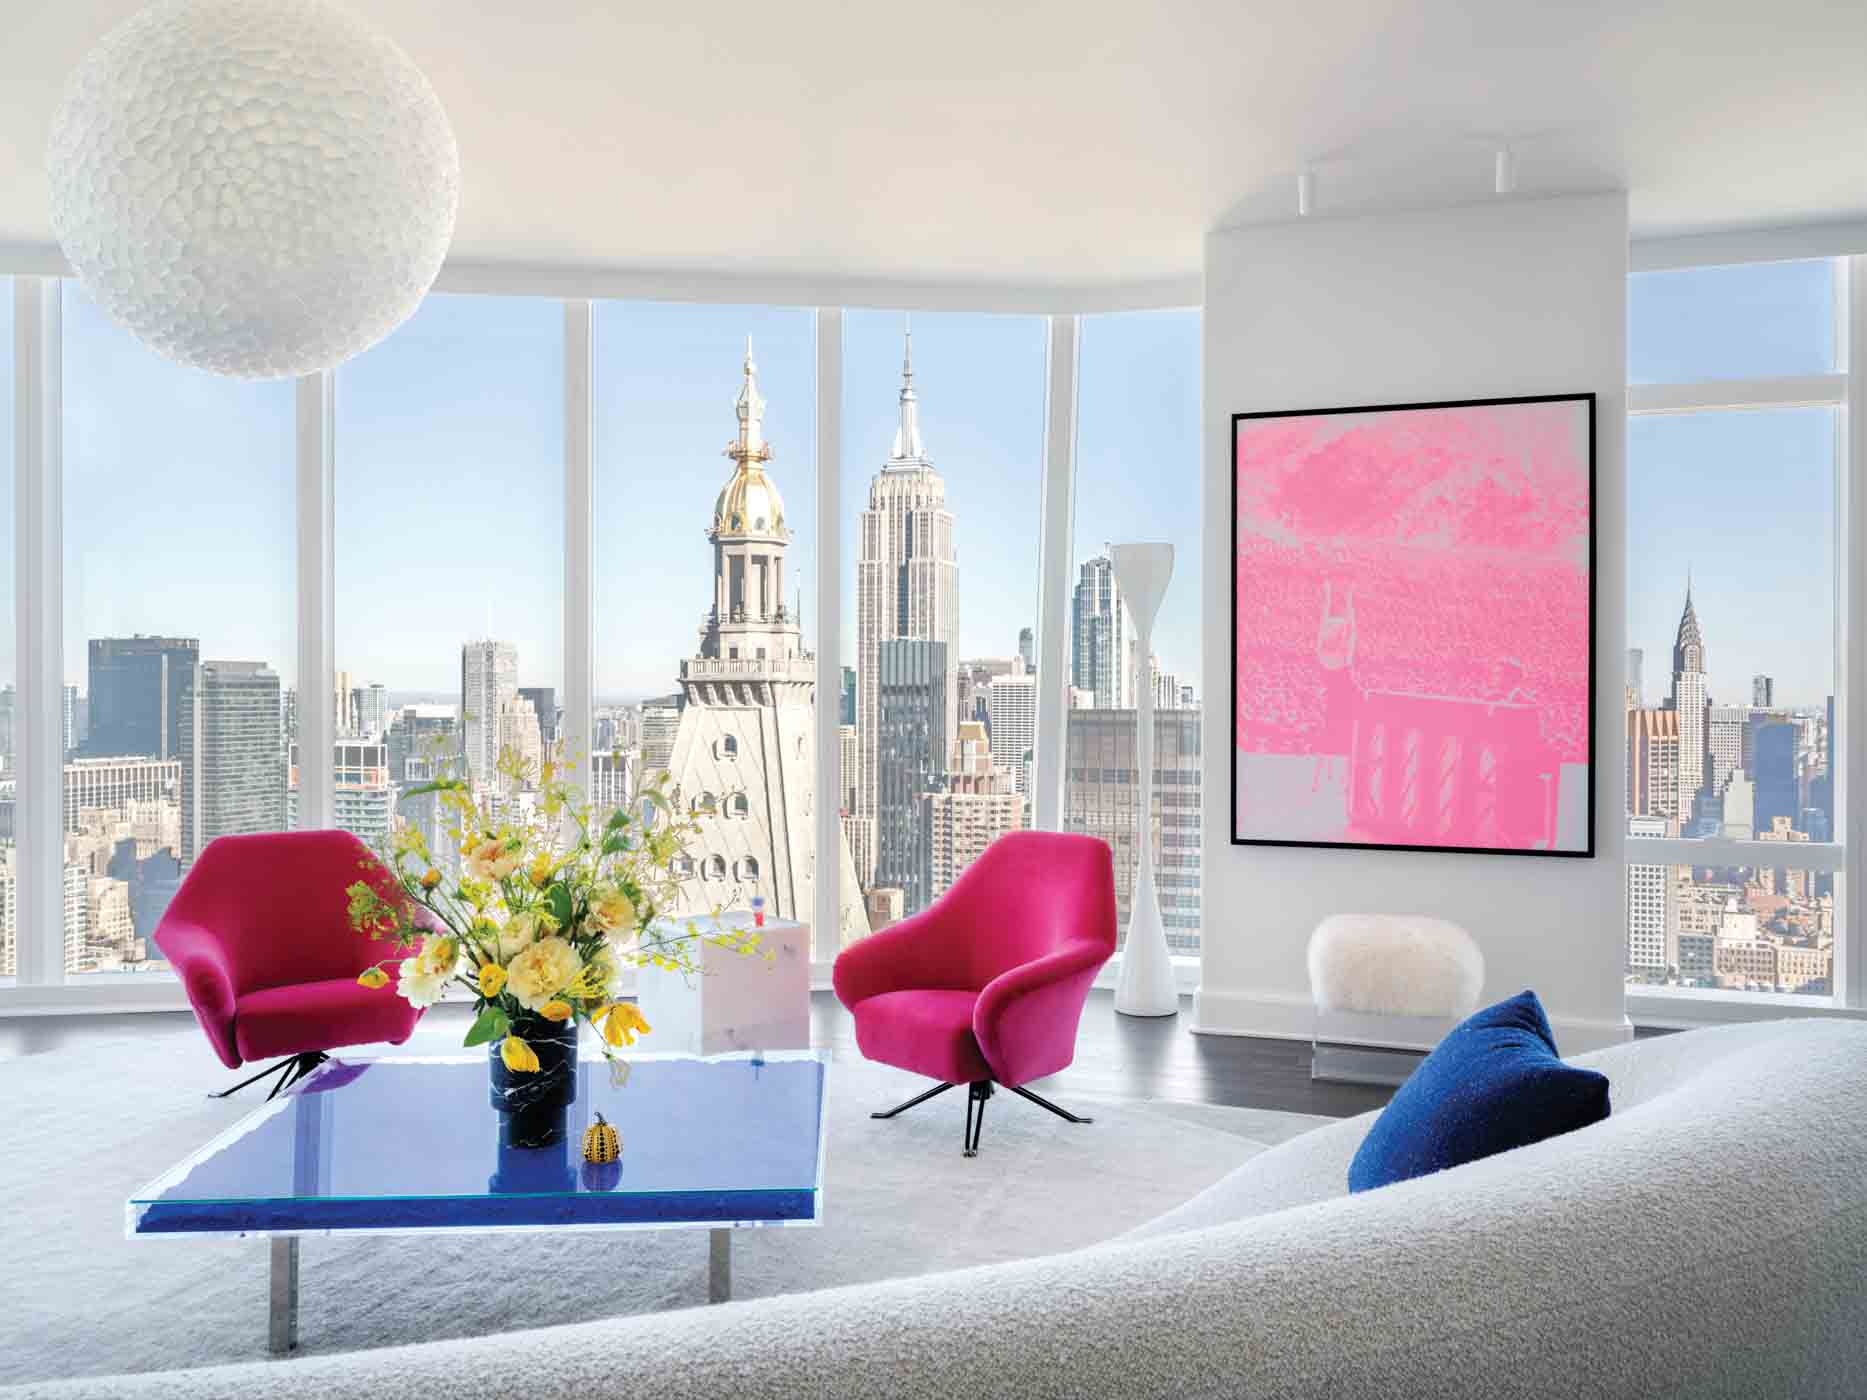 63 Room With A View. A Sara Story Designed Home In Manhattan On East 22nd Street